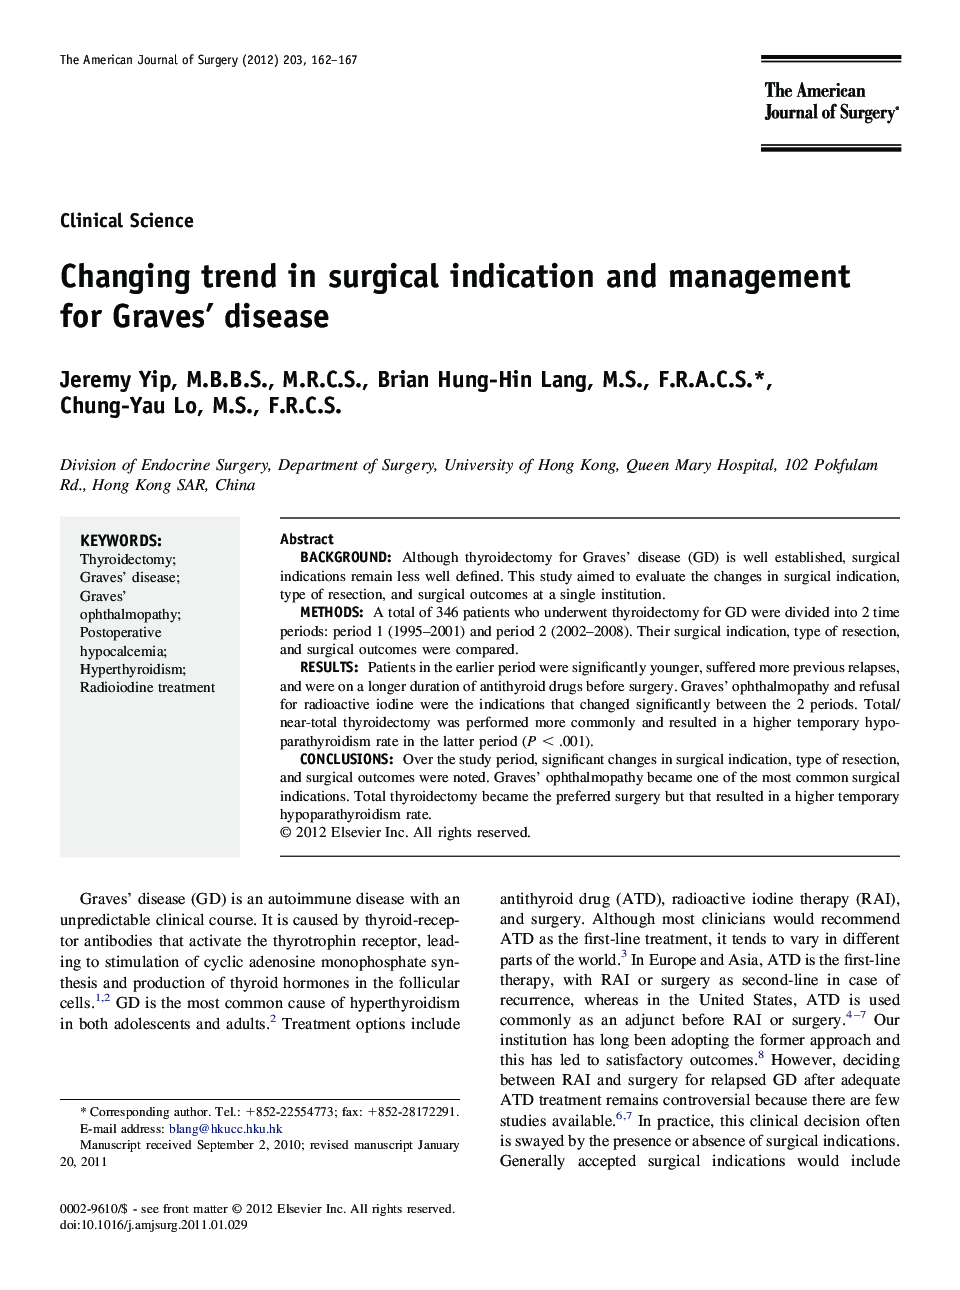 Changing trend in surgical indication and management for Graves' disease